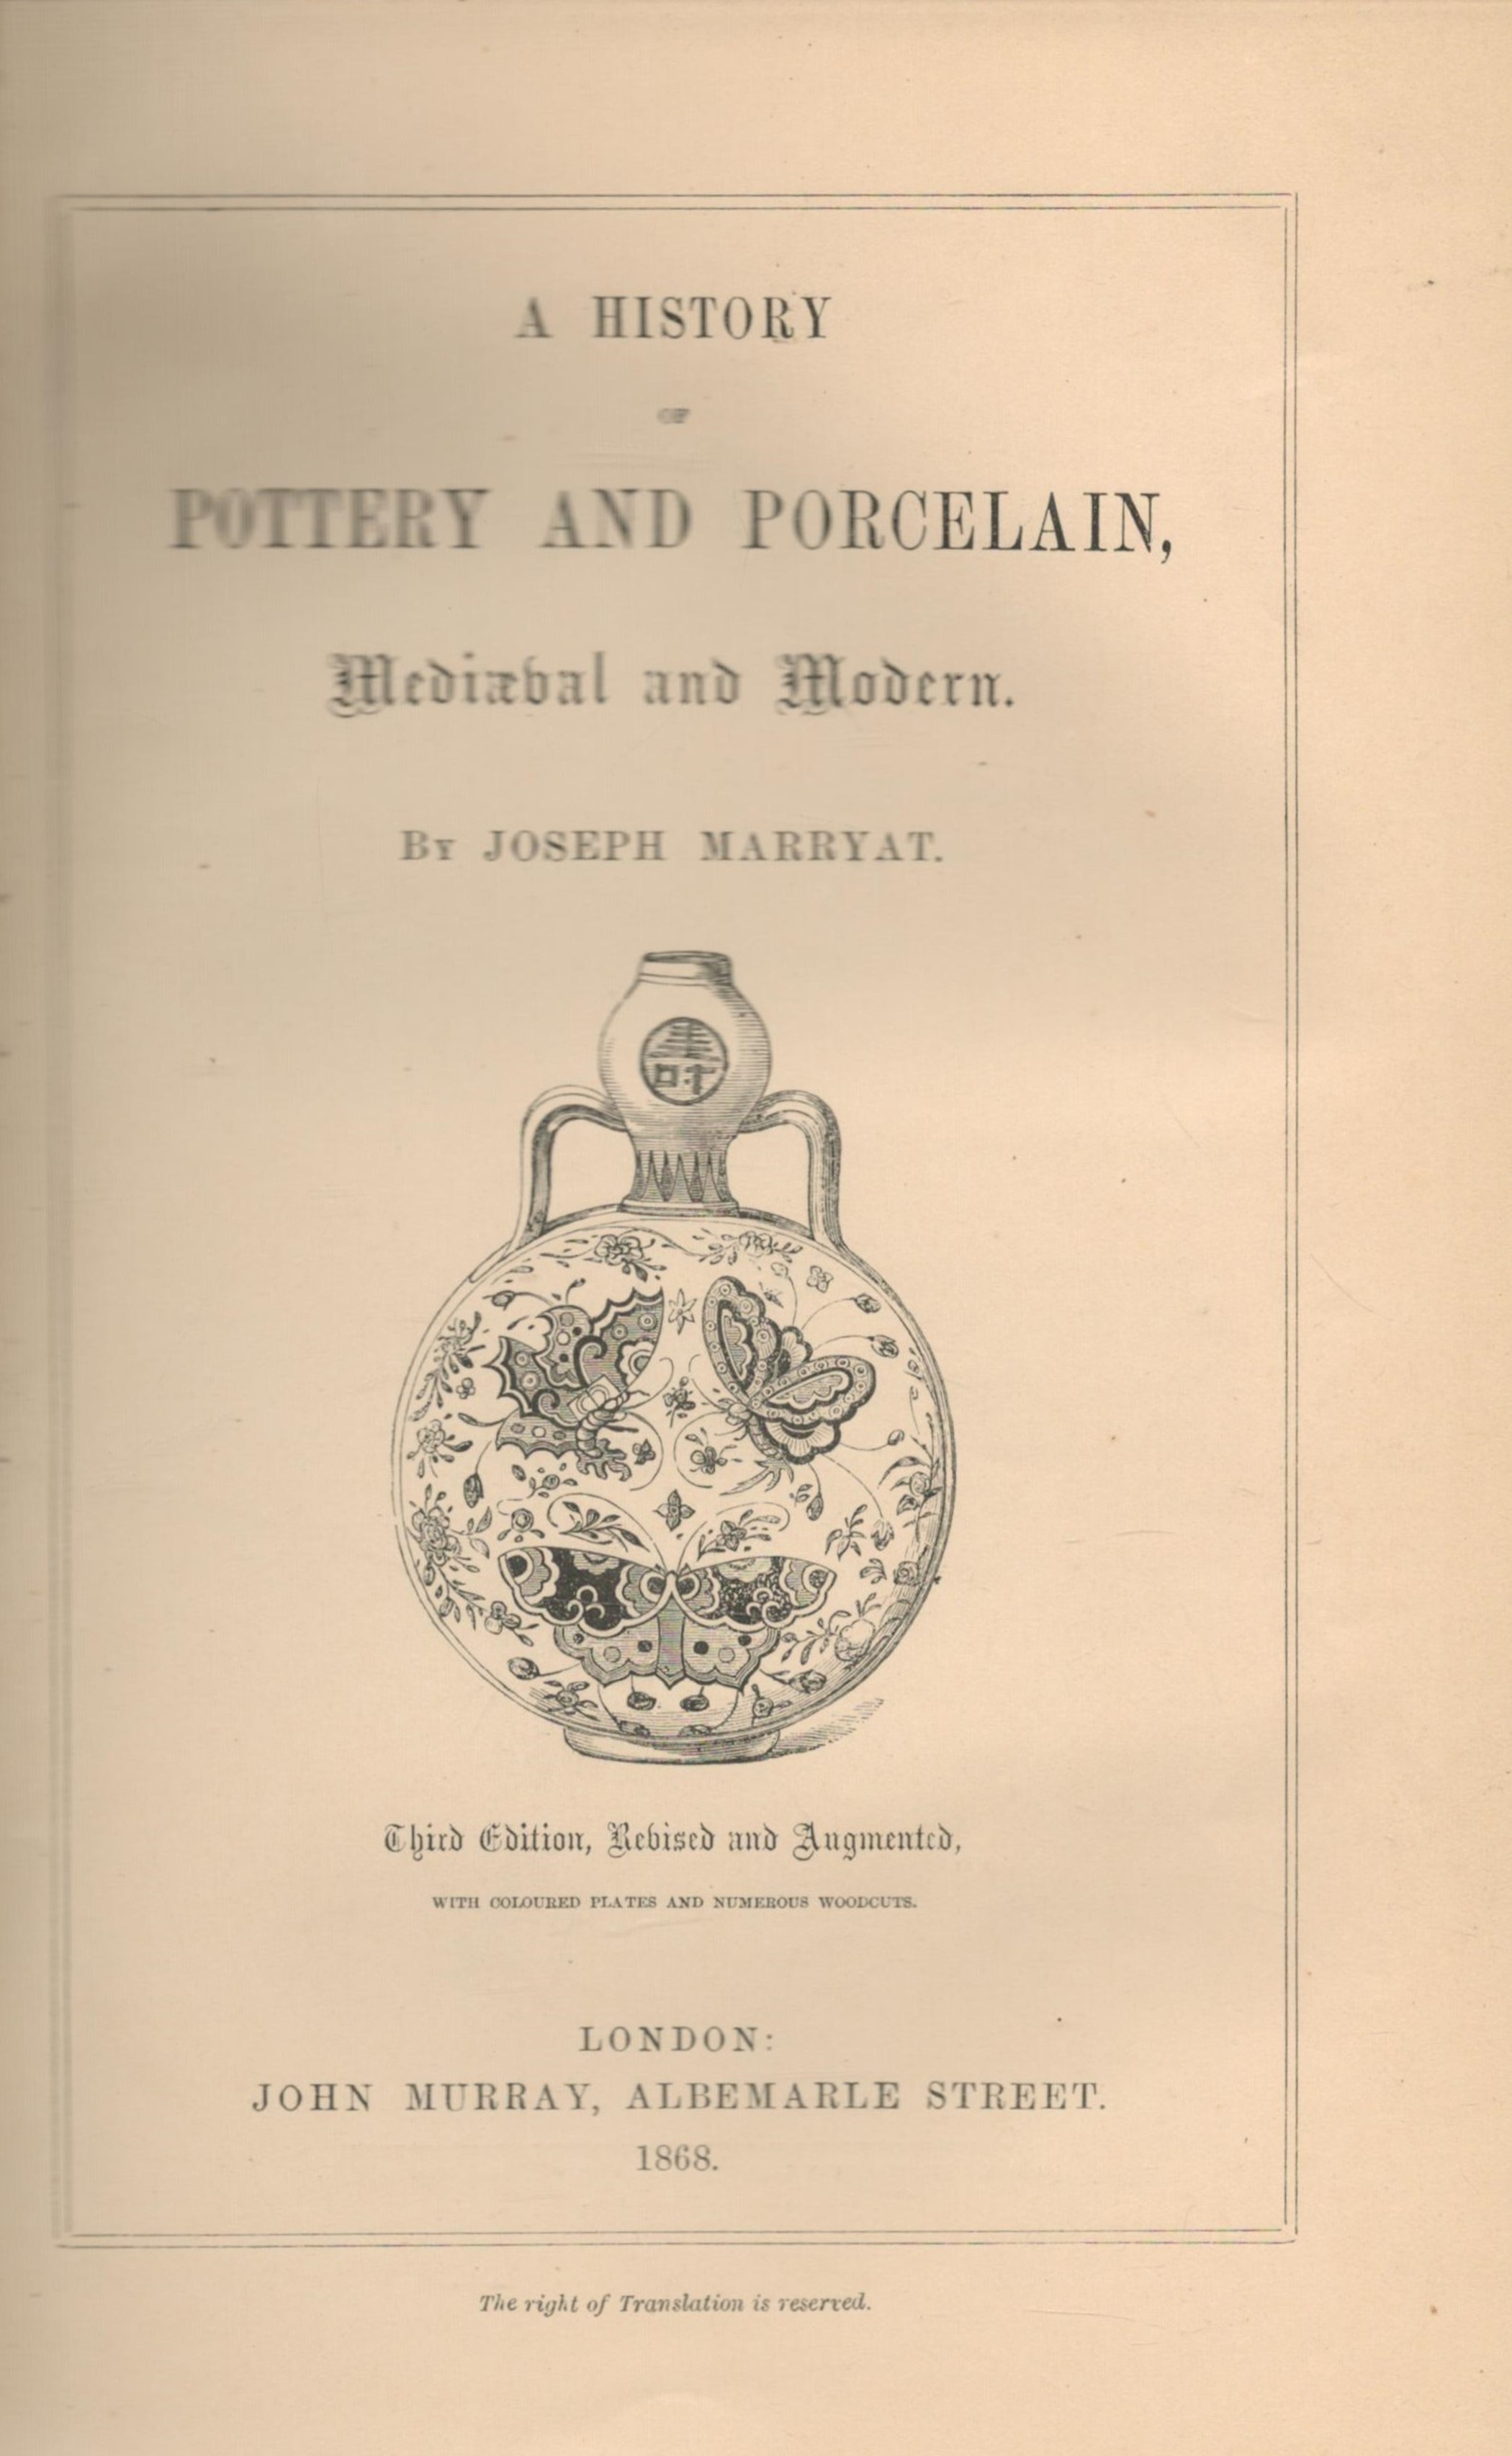 A History of Pottery and Porcelain, Medieval and Modern. By Joseph Marryat. 3 rd edition revised and - Image 2 of 2